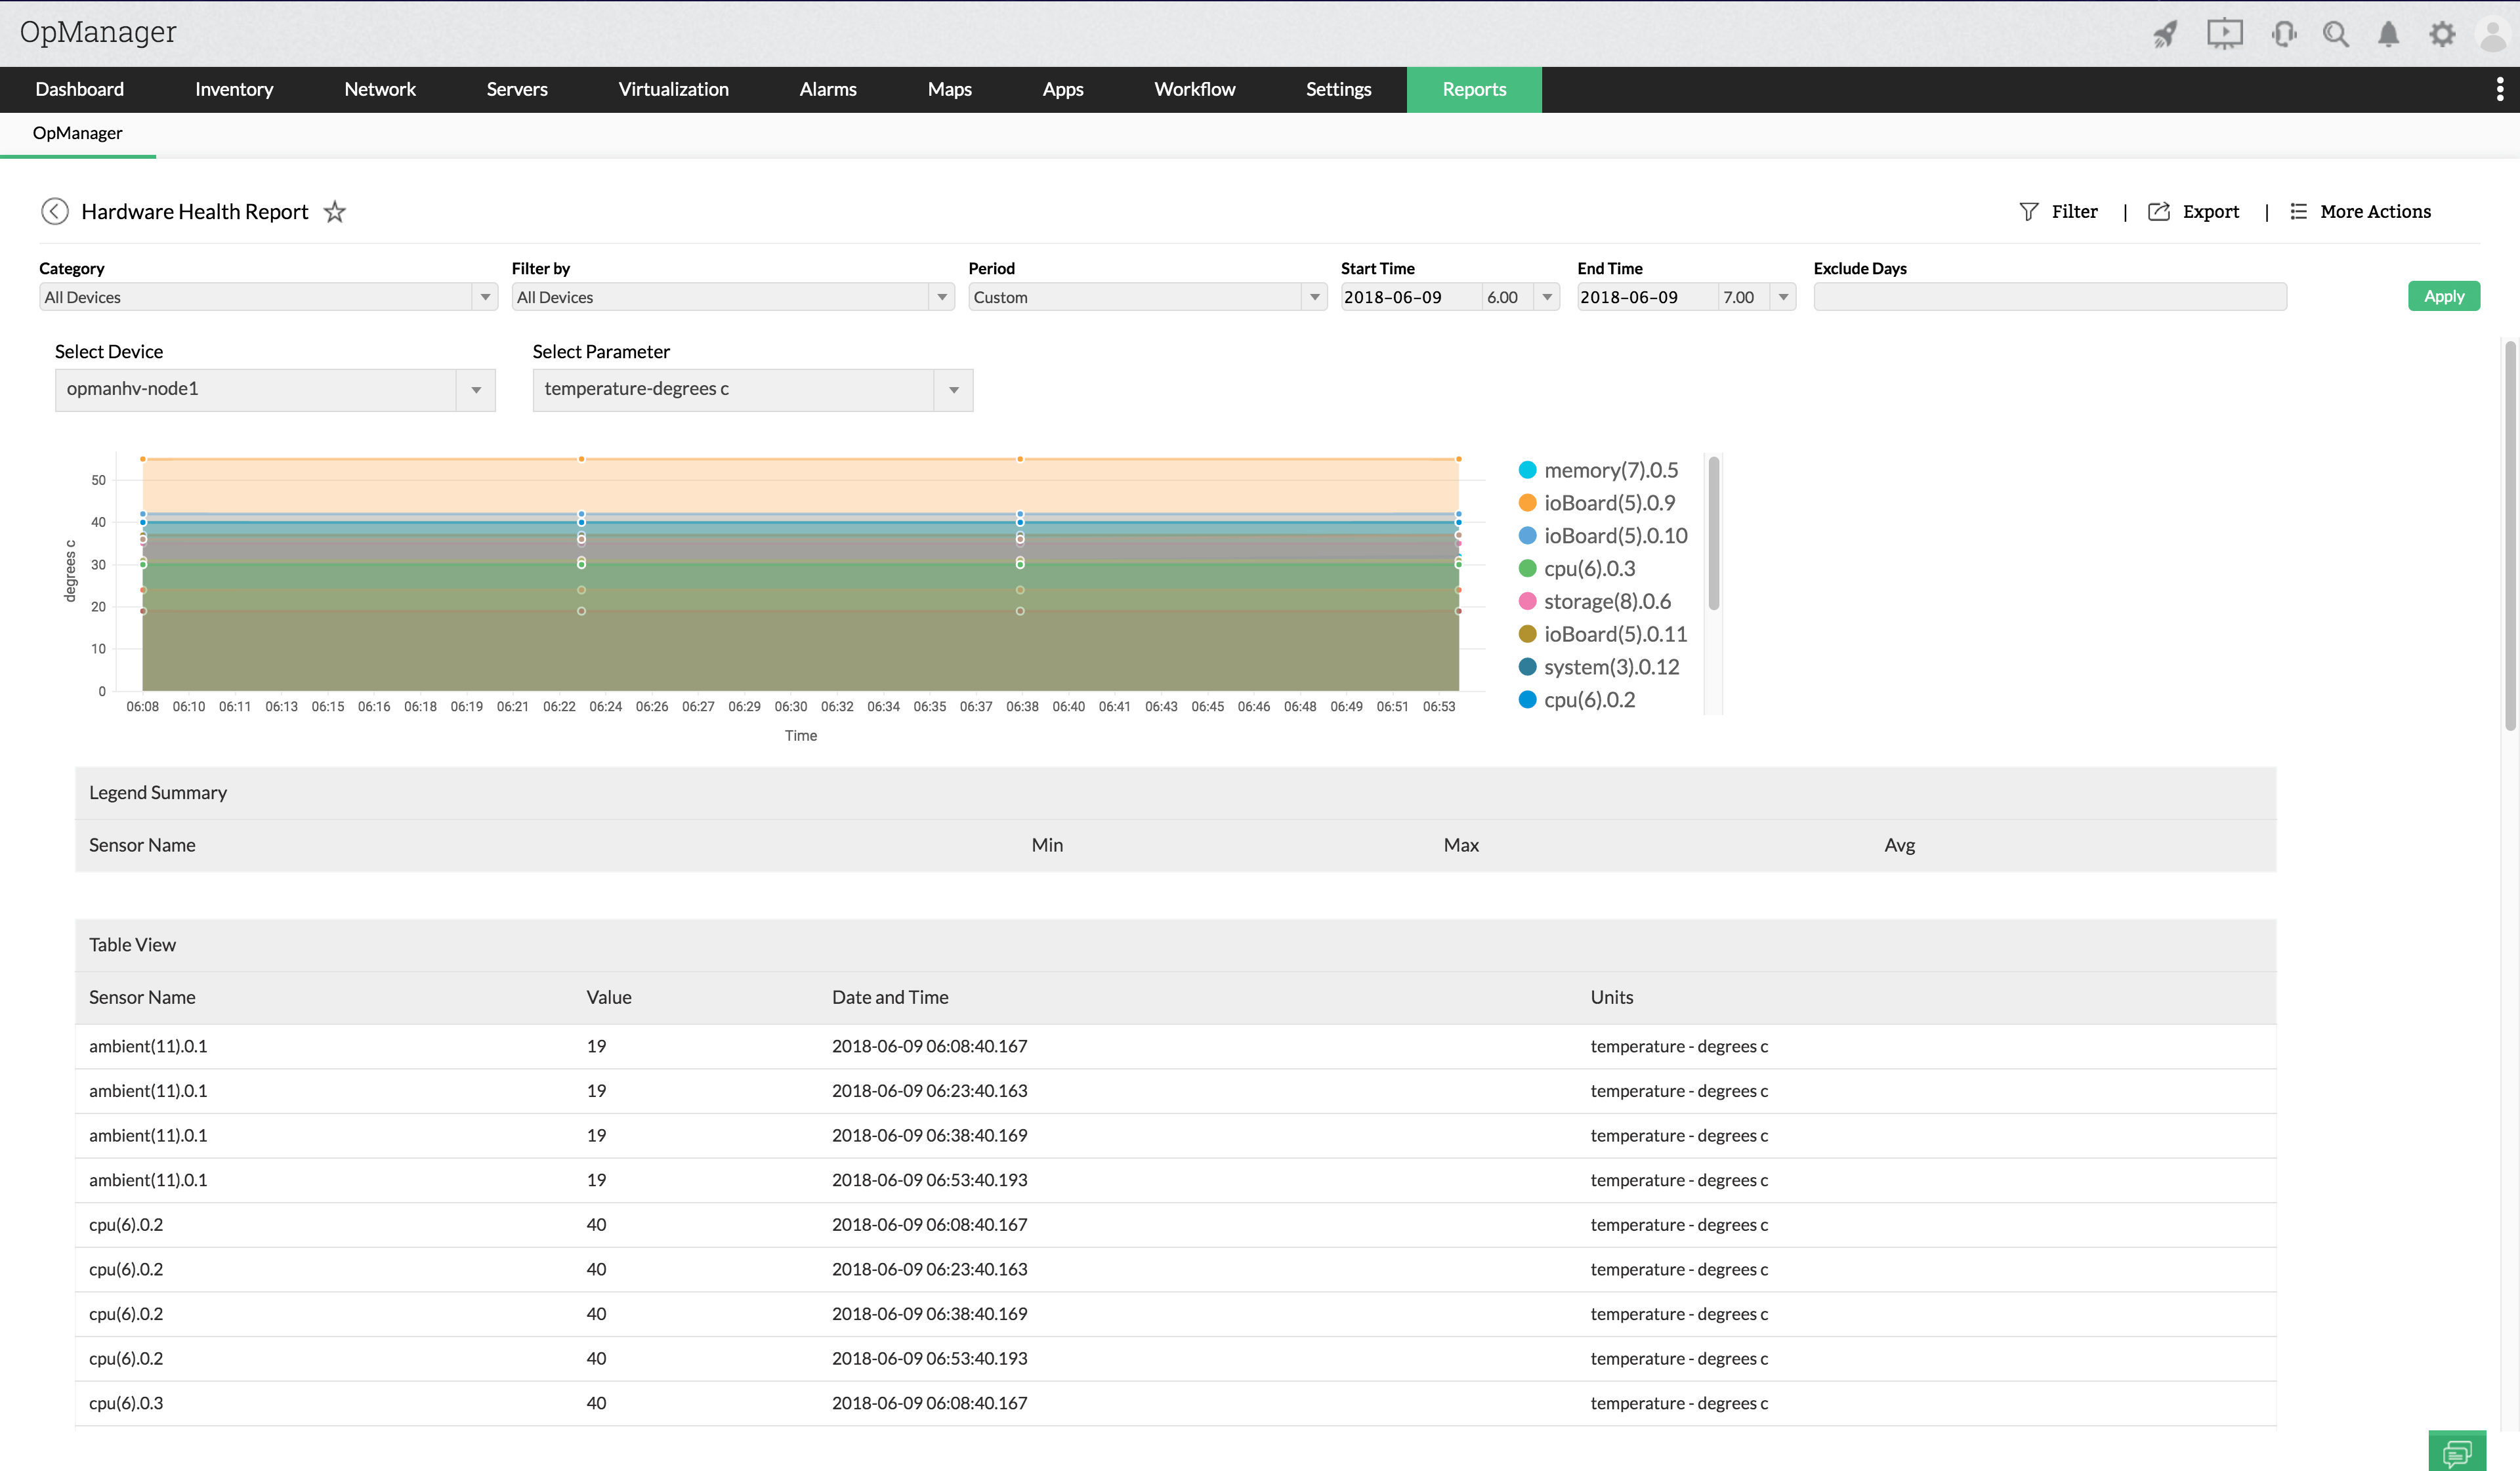 hardware health report - ManageEngine OpManager